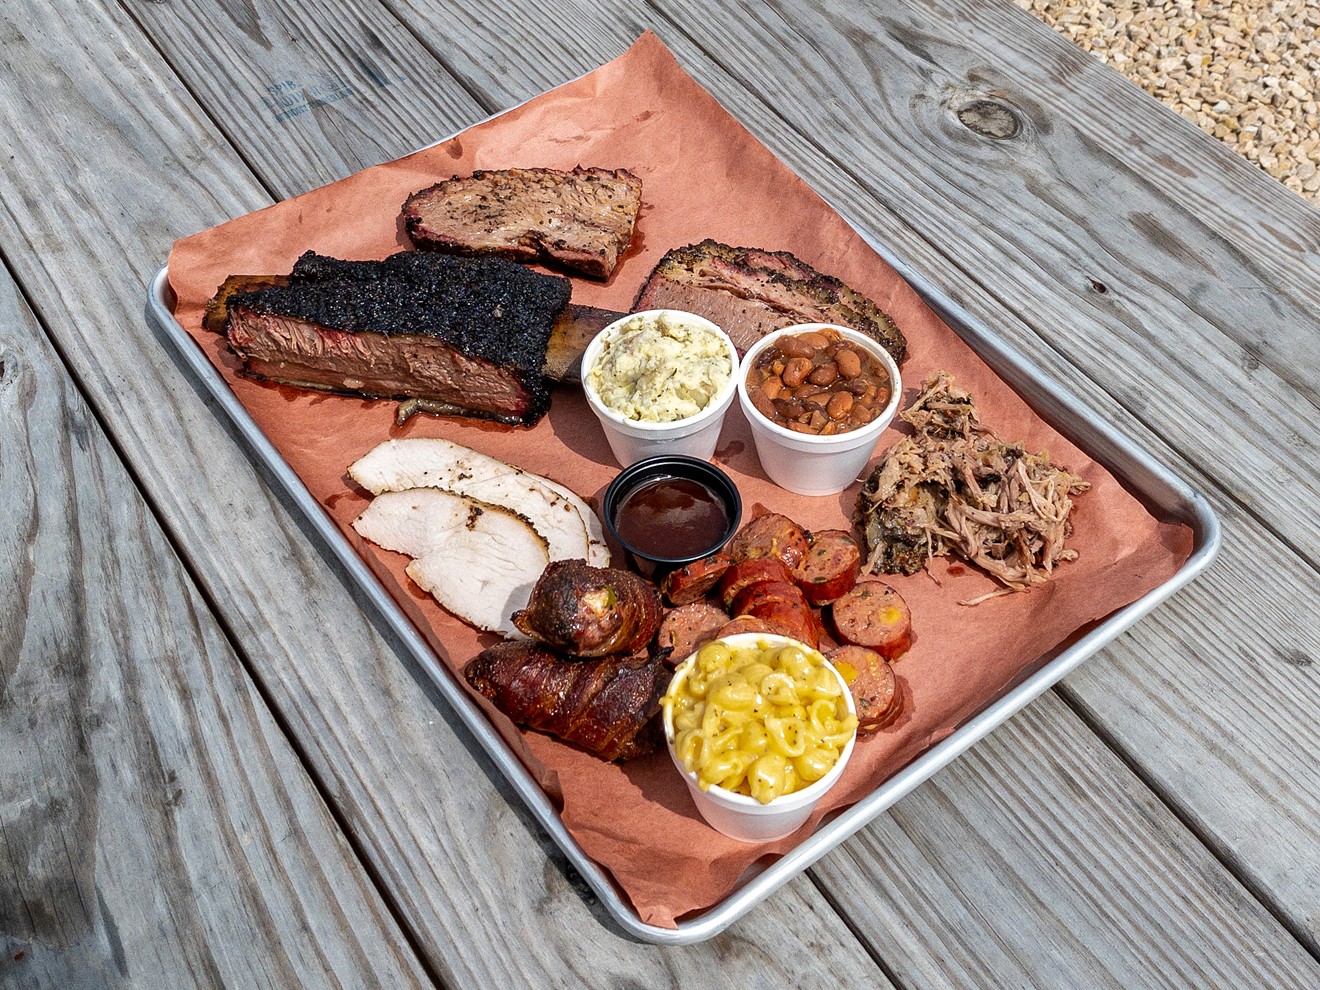 A tray of barbecue from Smoak Town showcasing almost the full menu.